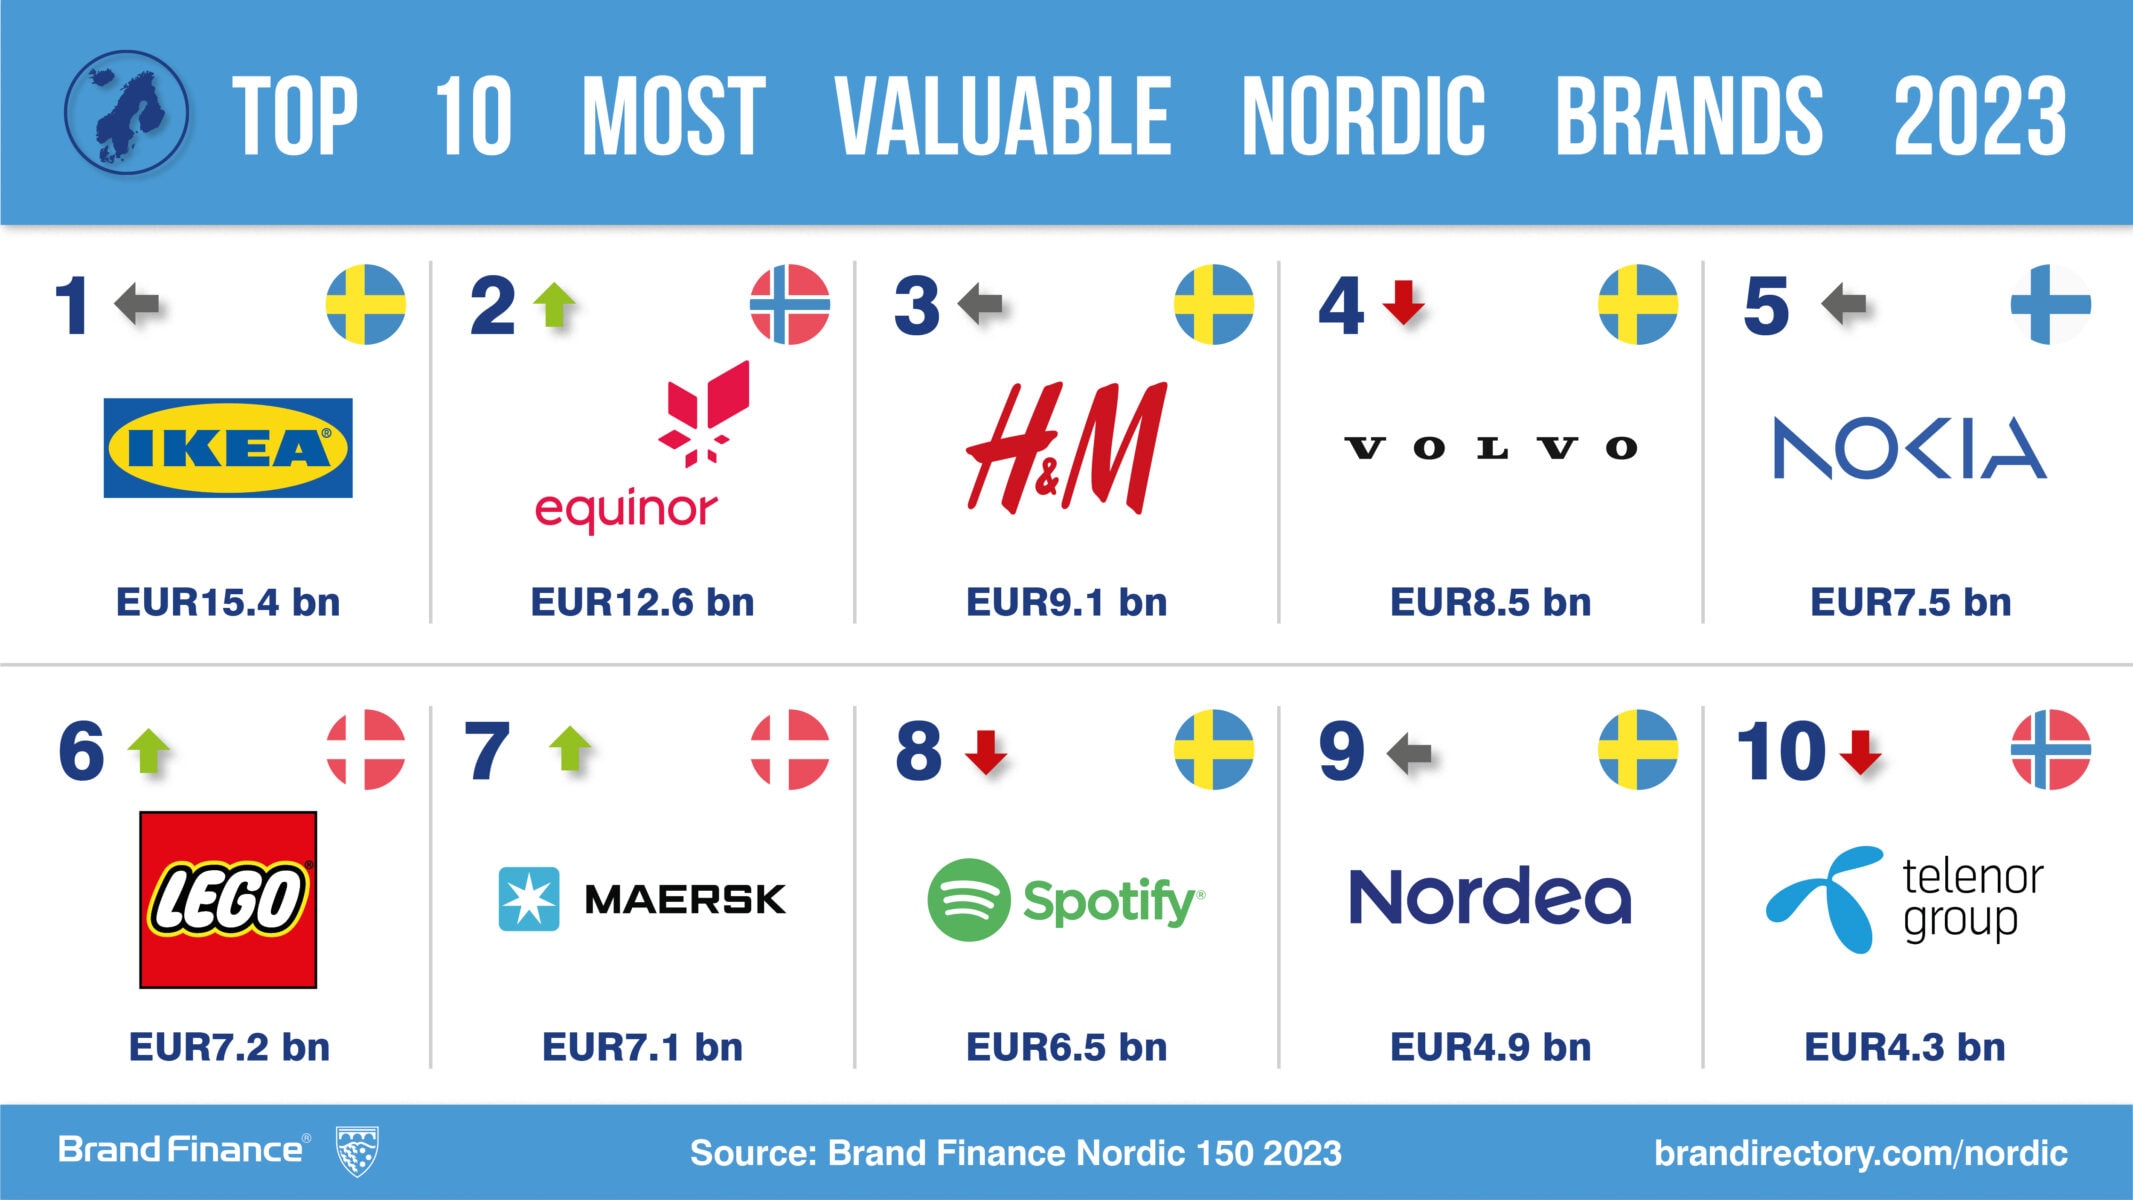 IKEA is reigning champion of Nordic brands but contends with declining  brand strength, Press Release